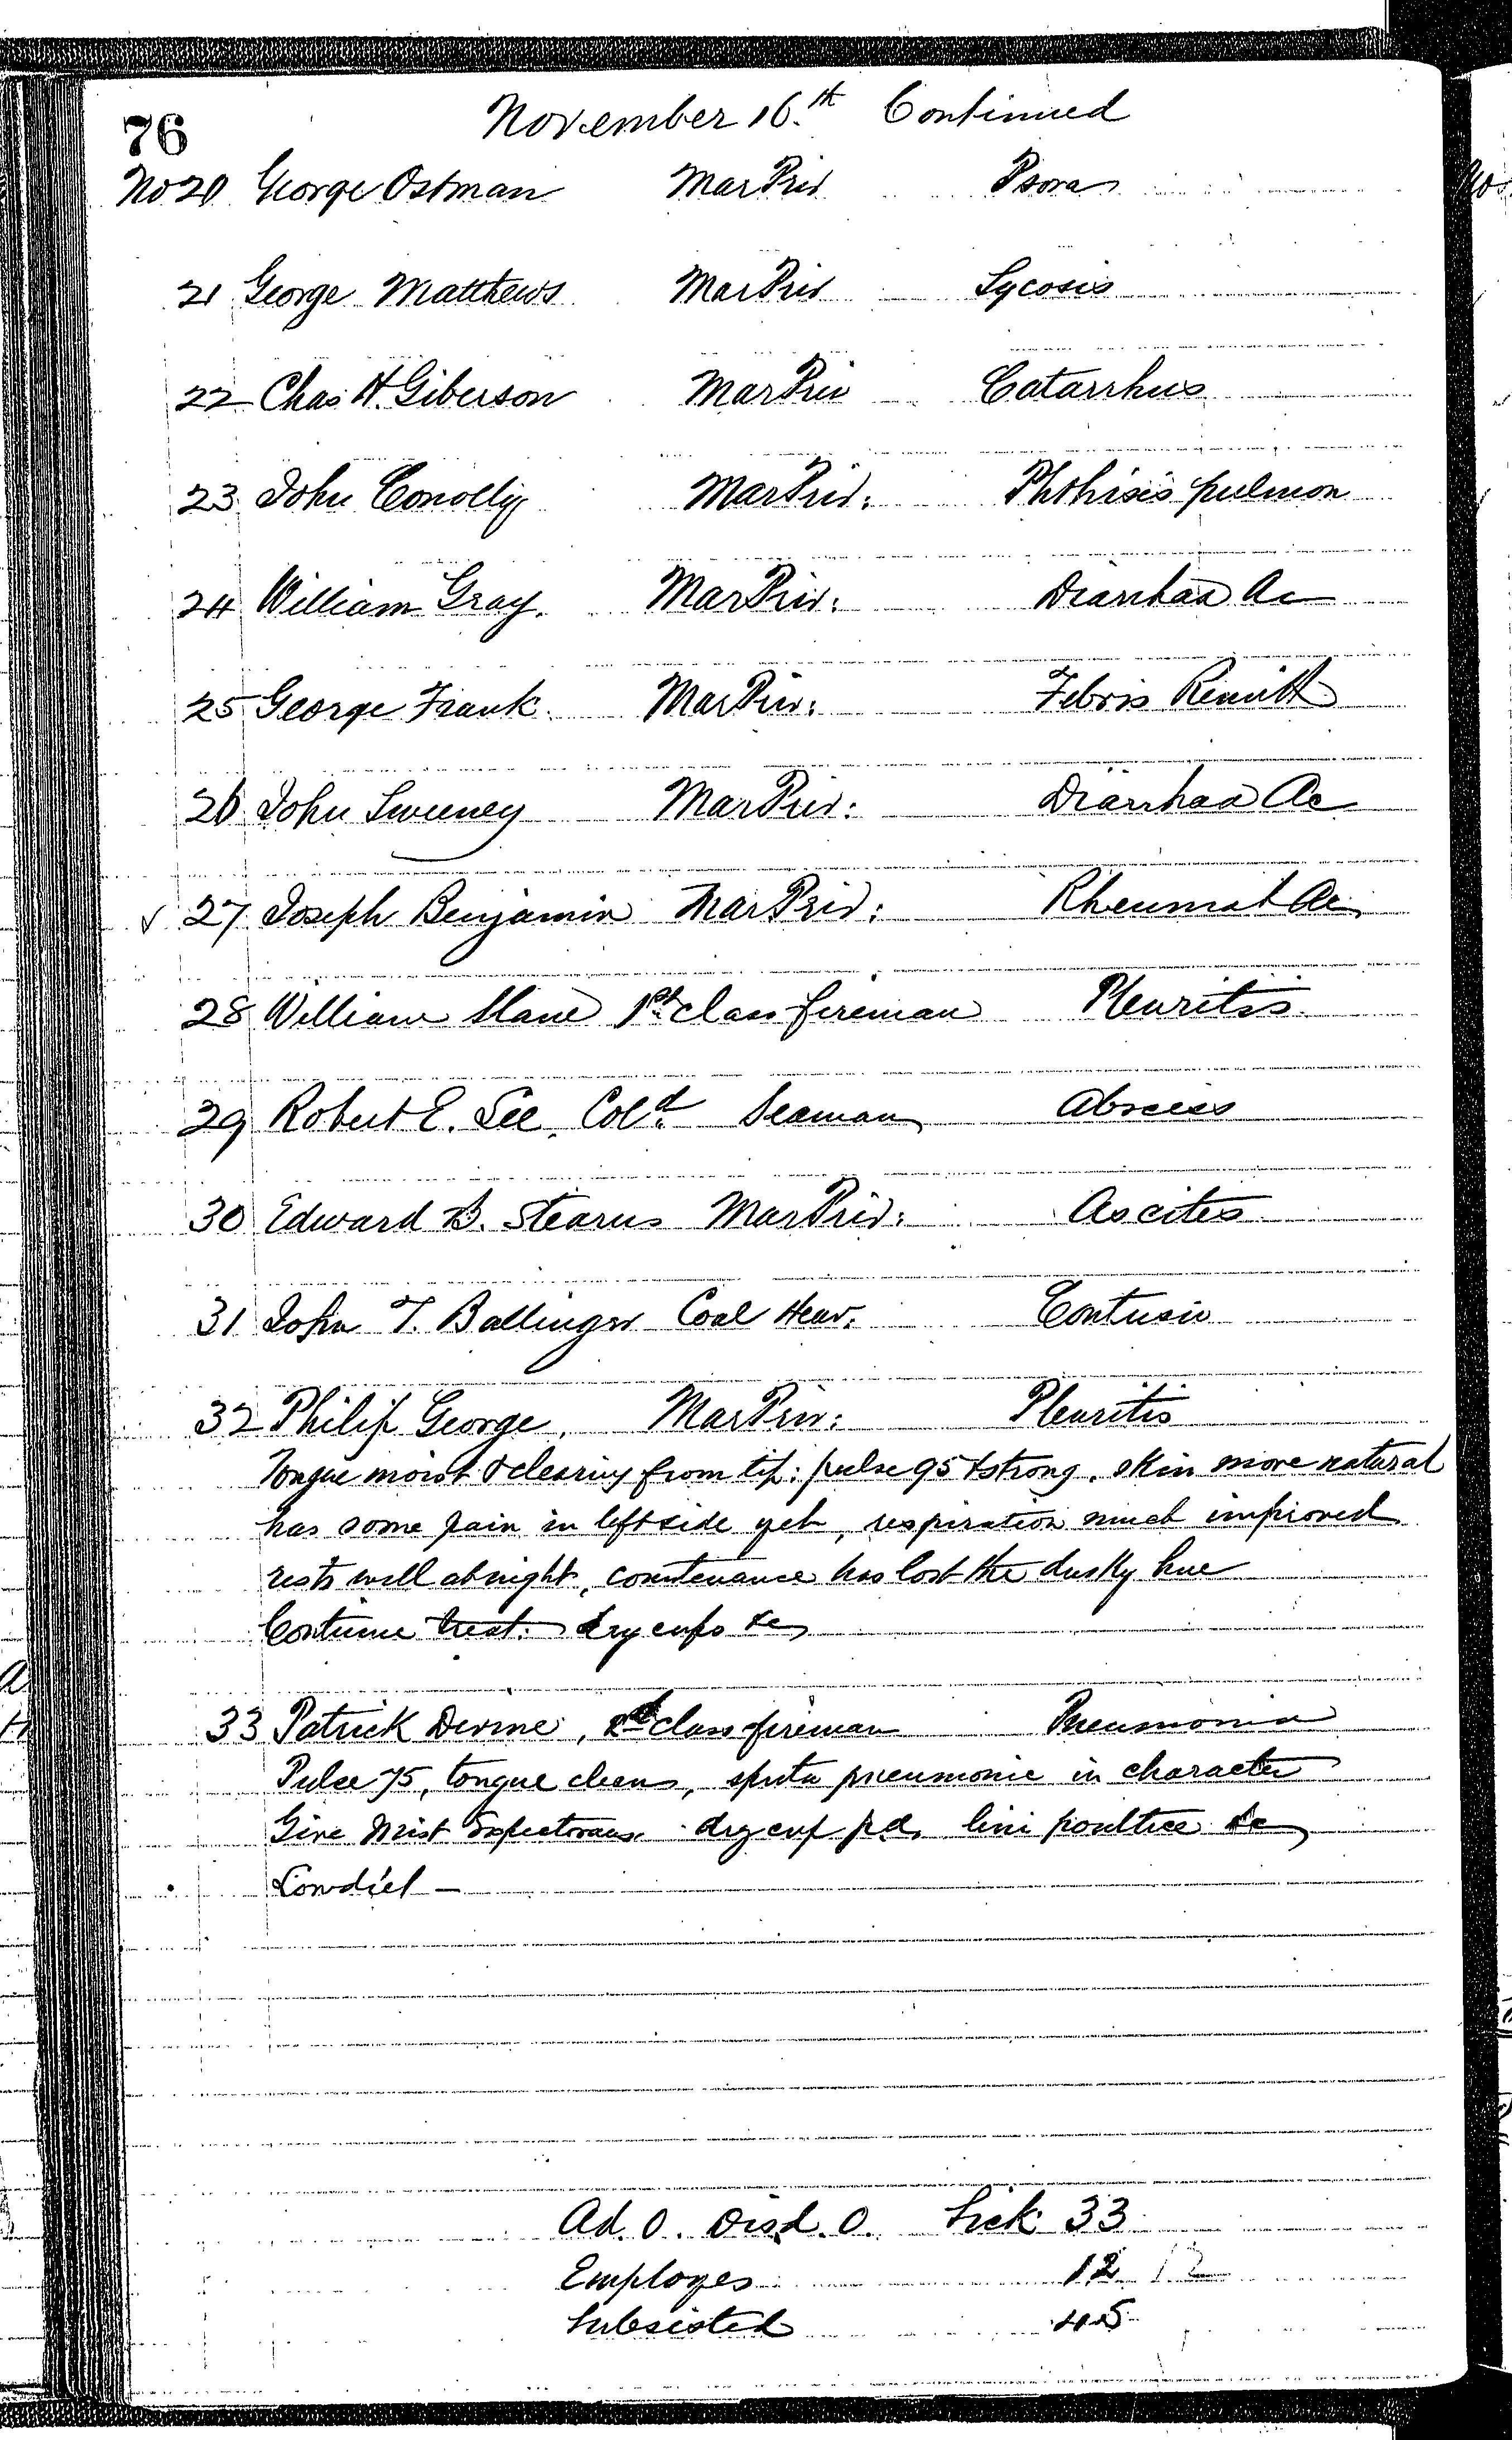 Patients in the Naval Hospital, Washington DC, on November 16, 1866, page 2 of 2, in the Medical Journal, October 1, 1866 to March 20, 1867